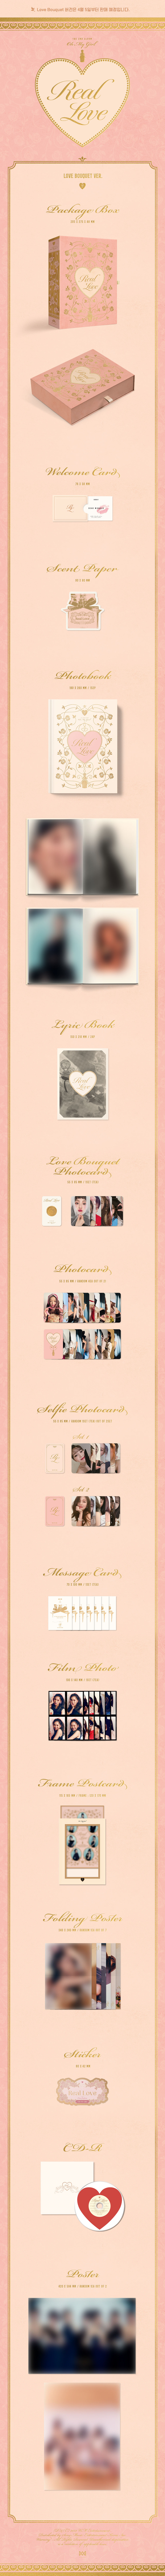 ktown4u.com : OH MY GIRL - 2nd Album [Real Love] (Floral Ver.)